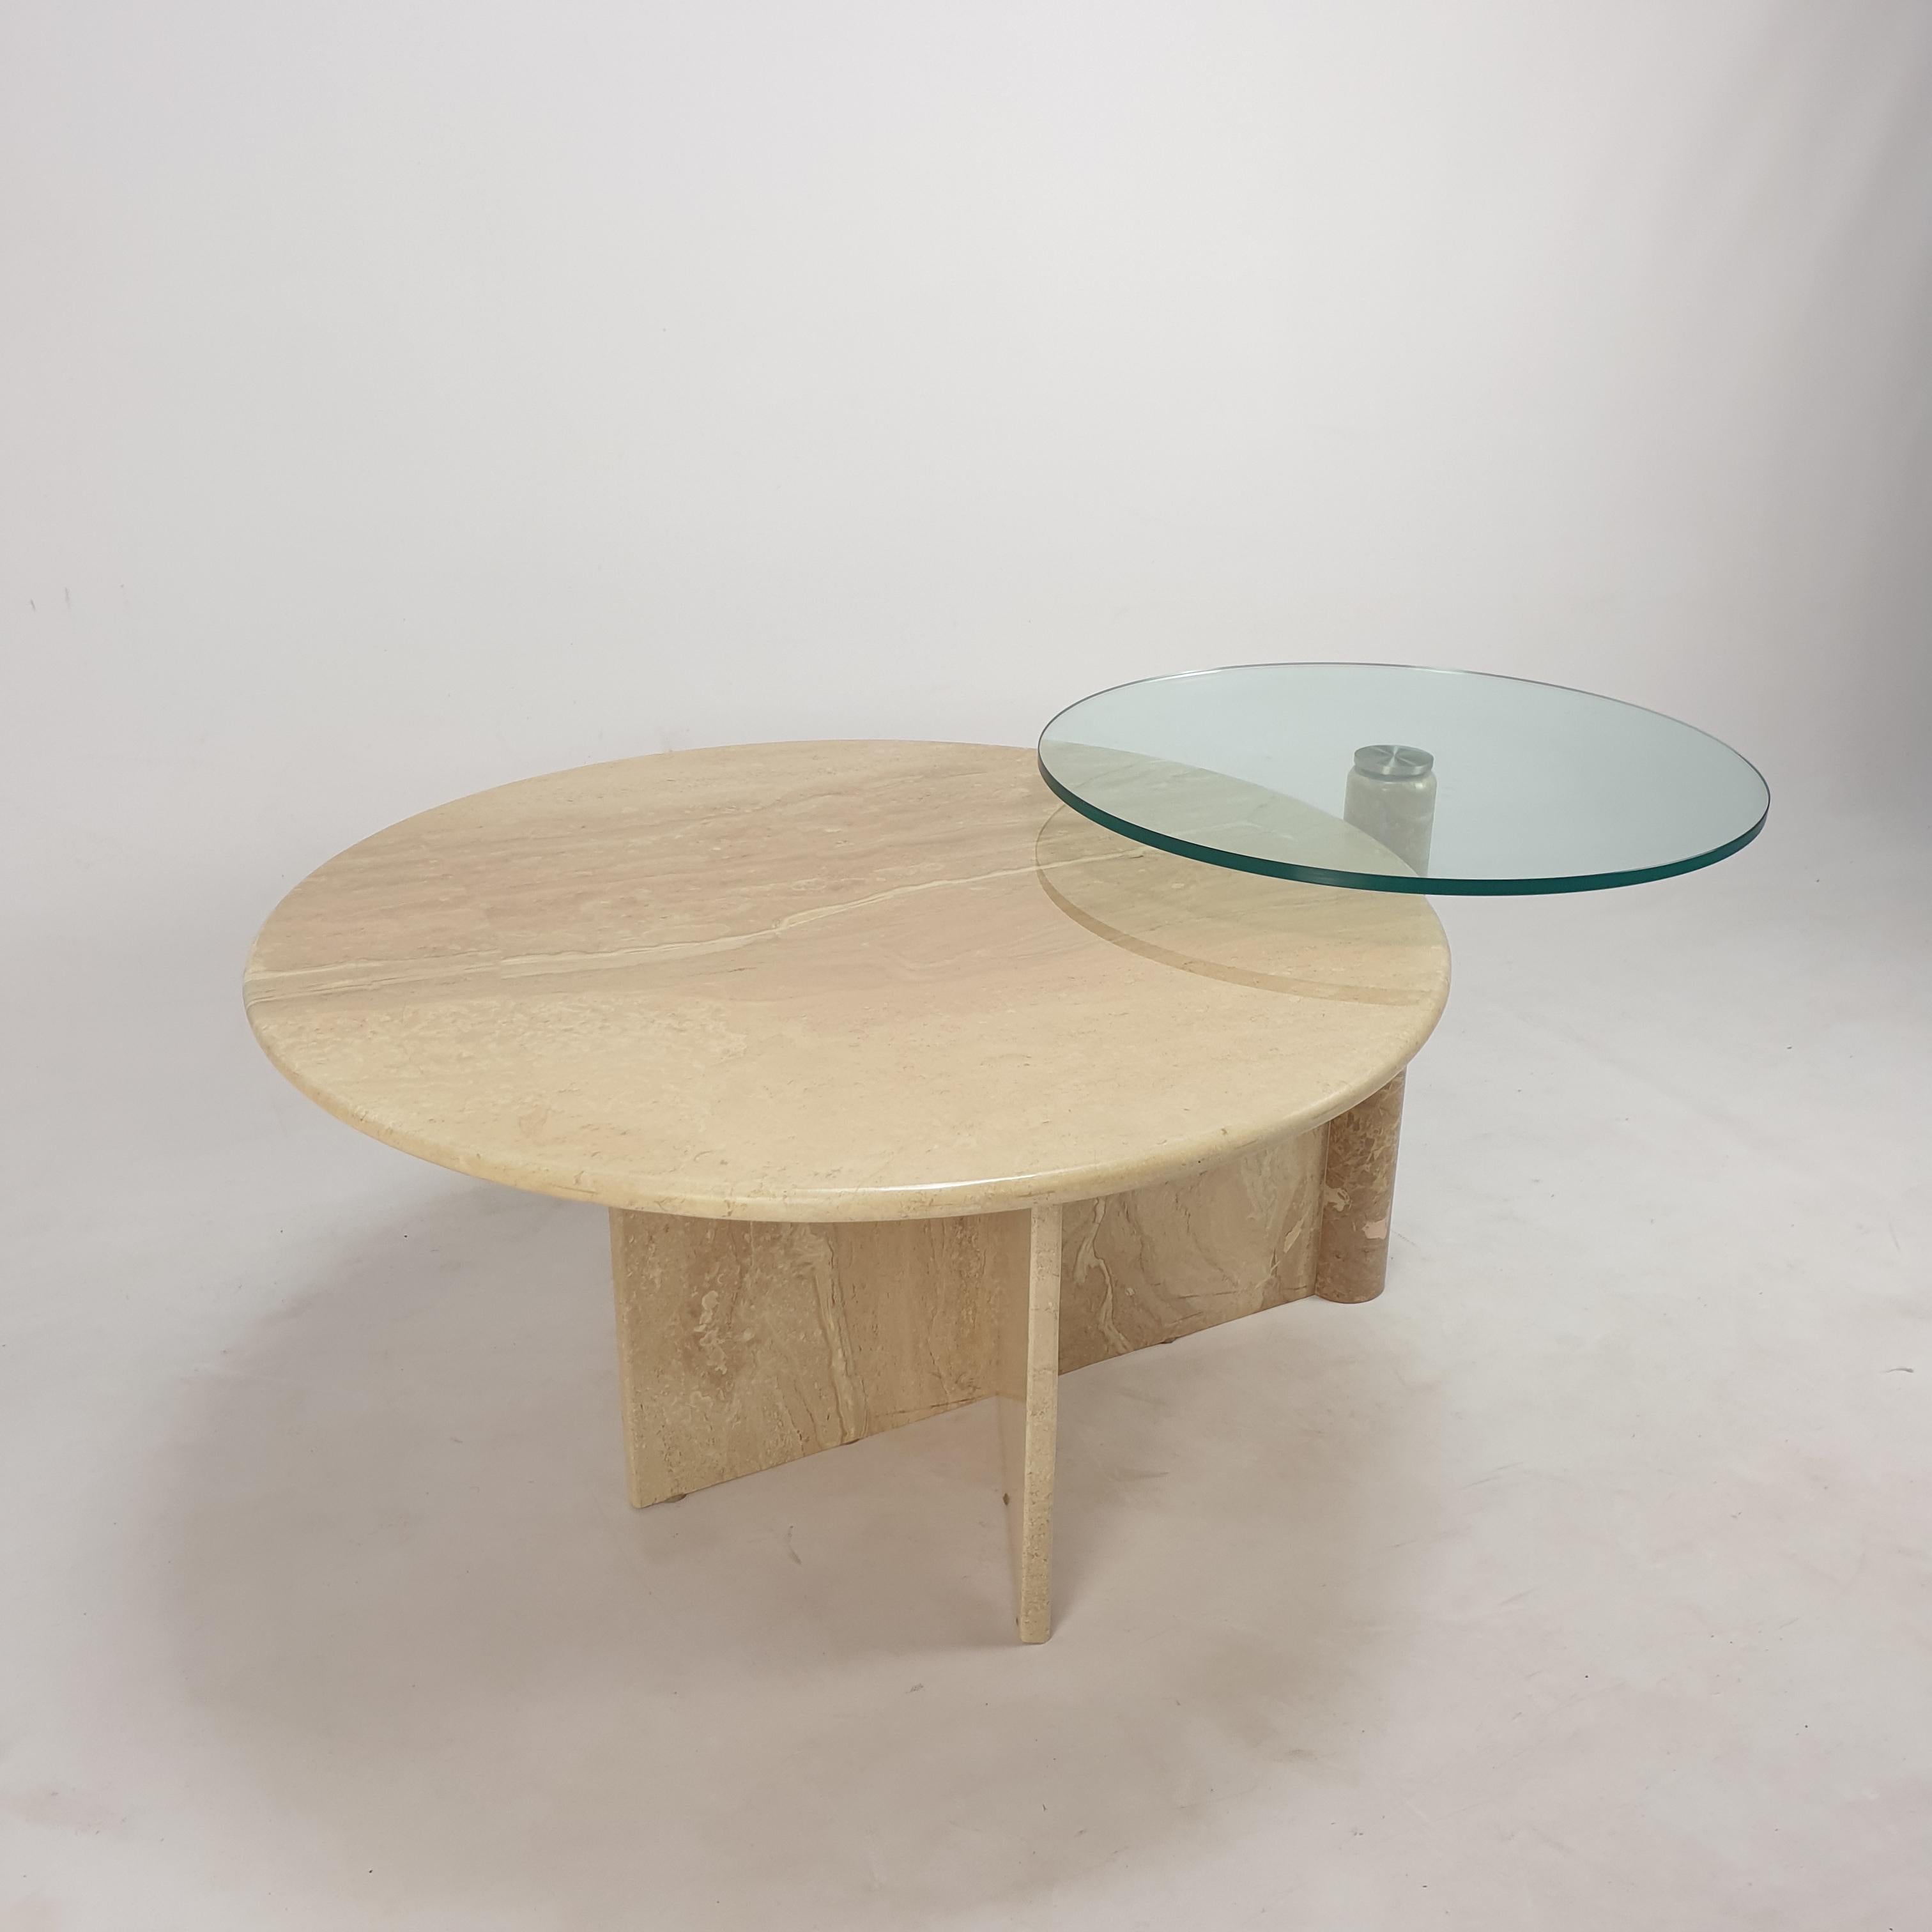 Italian Travertine and Glass Coffee Table, 1980s For Sale 9